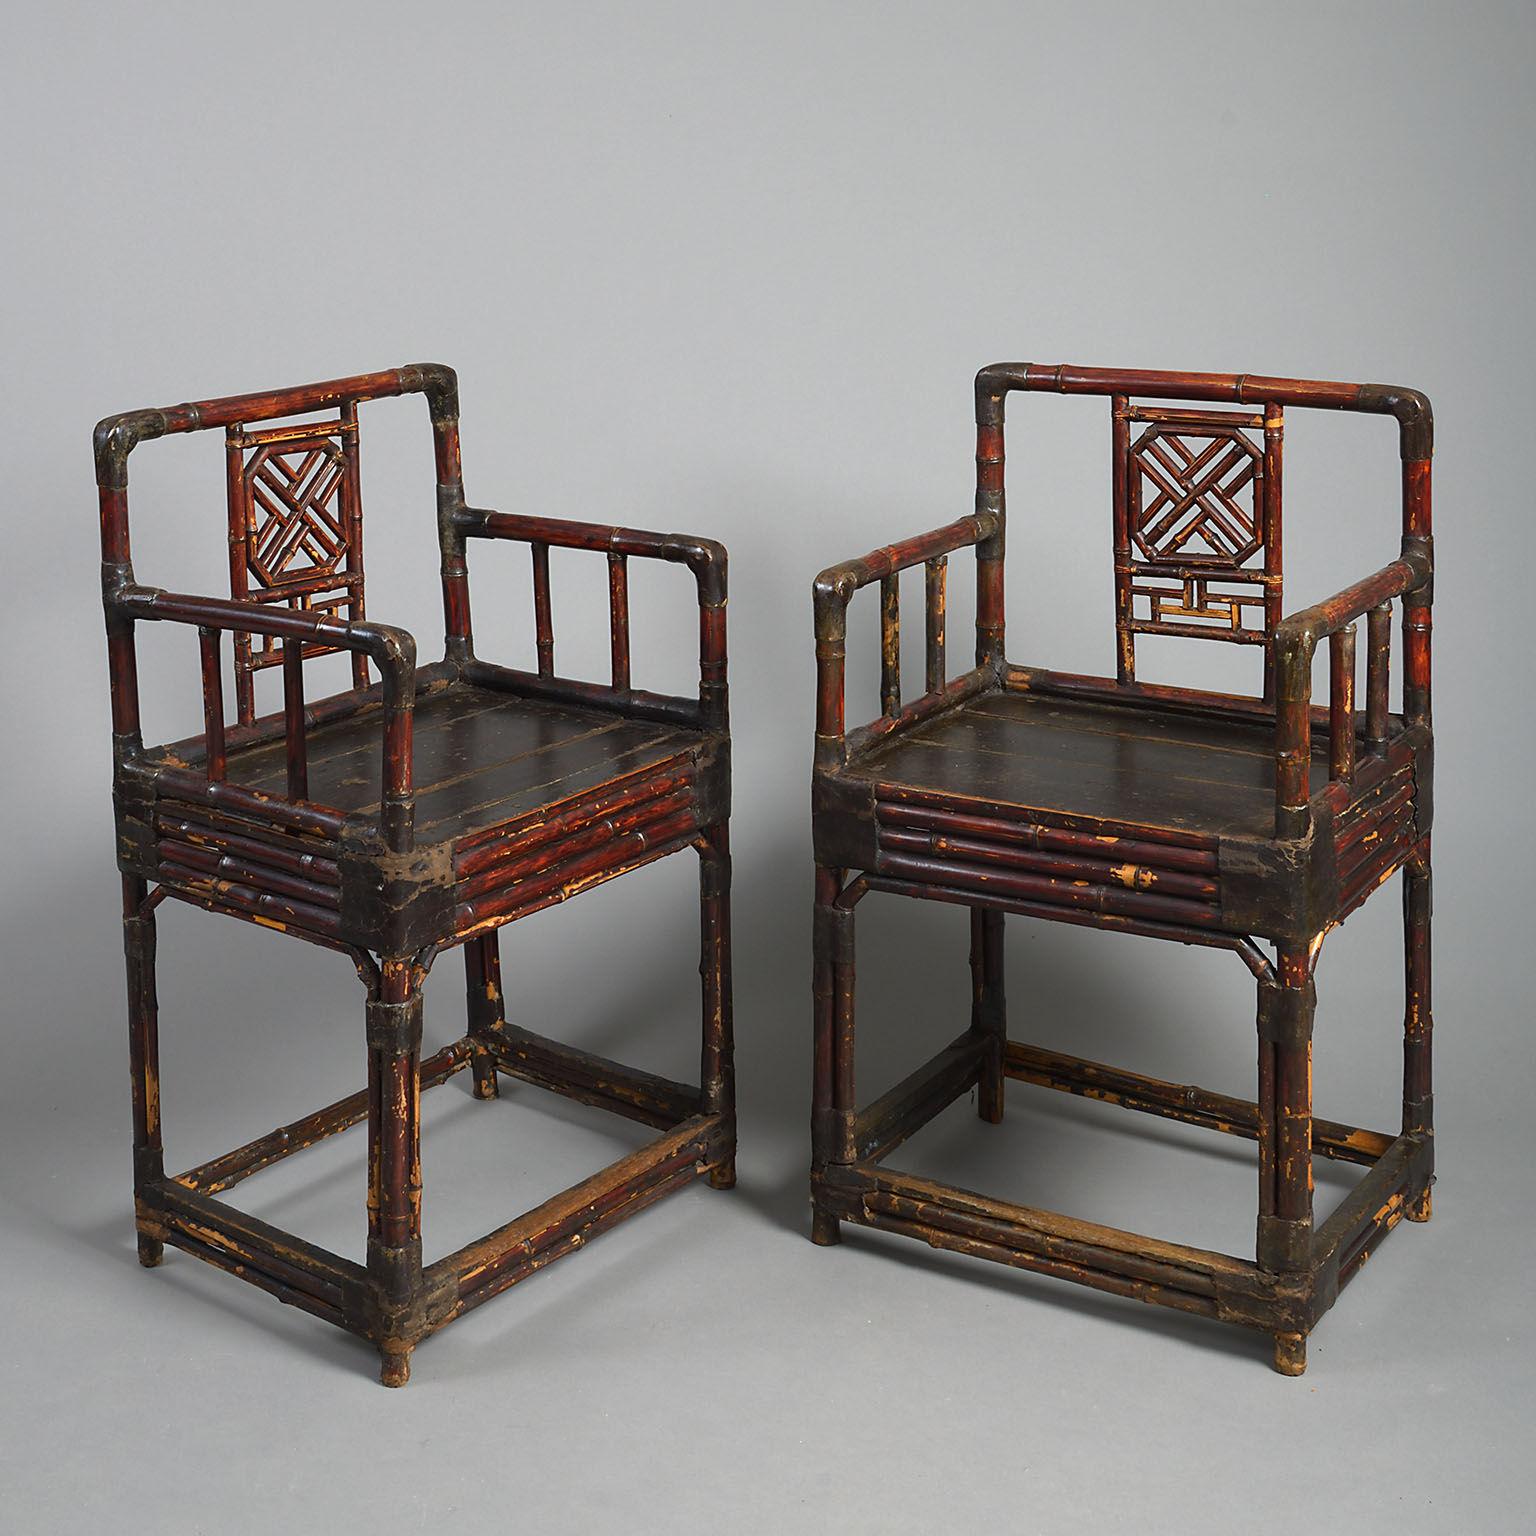 In the manner of Sir William Chambers, with trellis splats, solid seats and cluster legs joined by stretchers in their original condition. 

Two pairs available or one set of four. 

Chinese for European Export, mid-late 18th century.